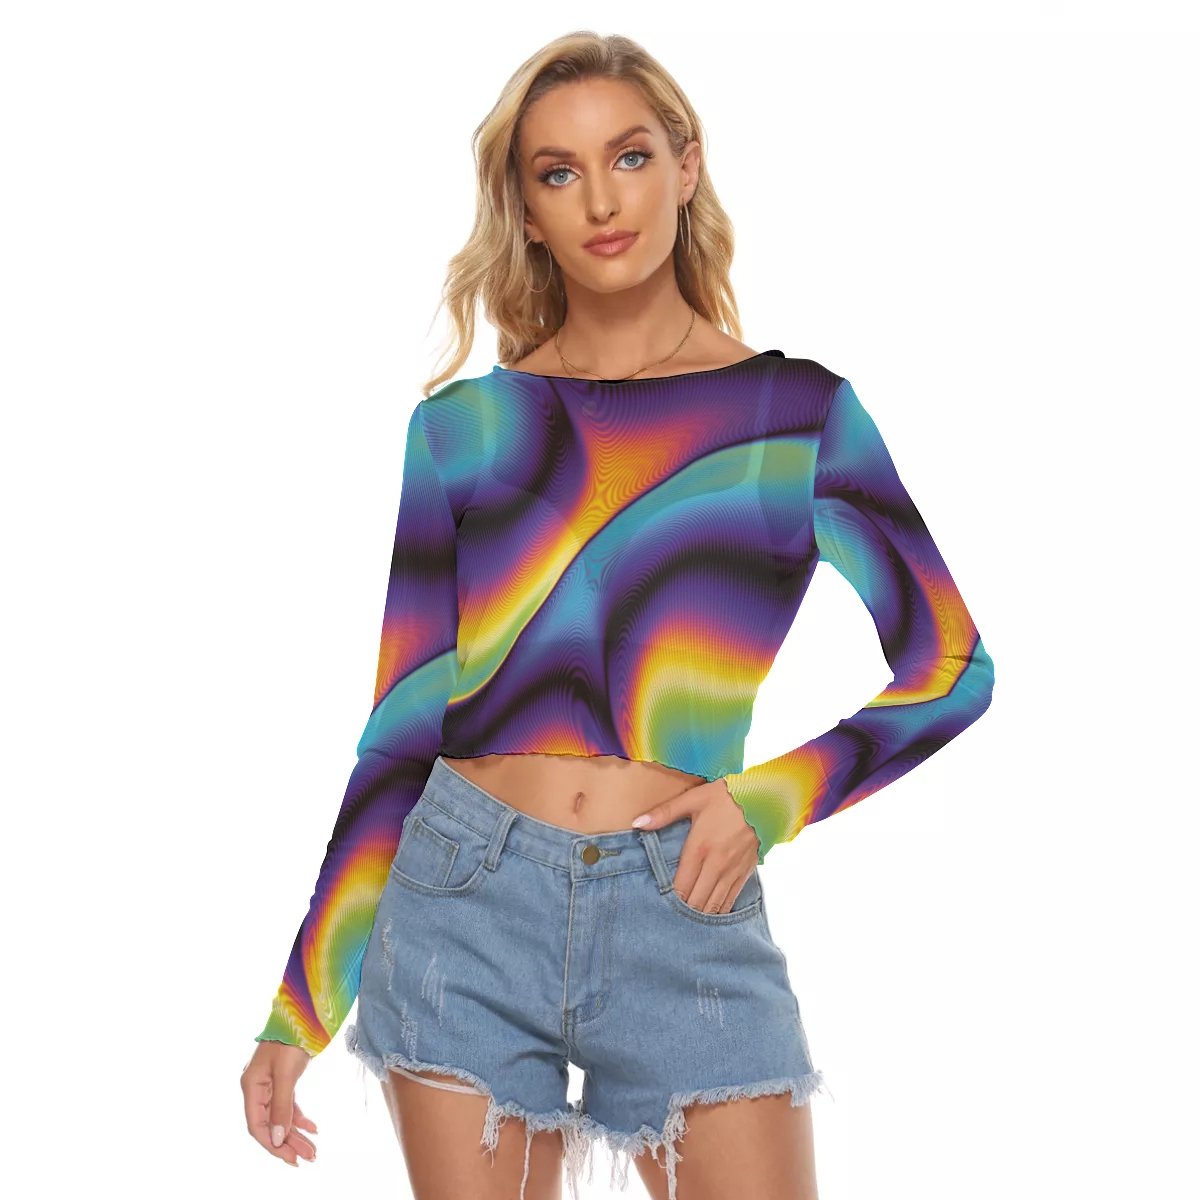 Abstract Colorful Psychedelic Women's Mesh Long Sleeves T-shirt